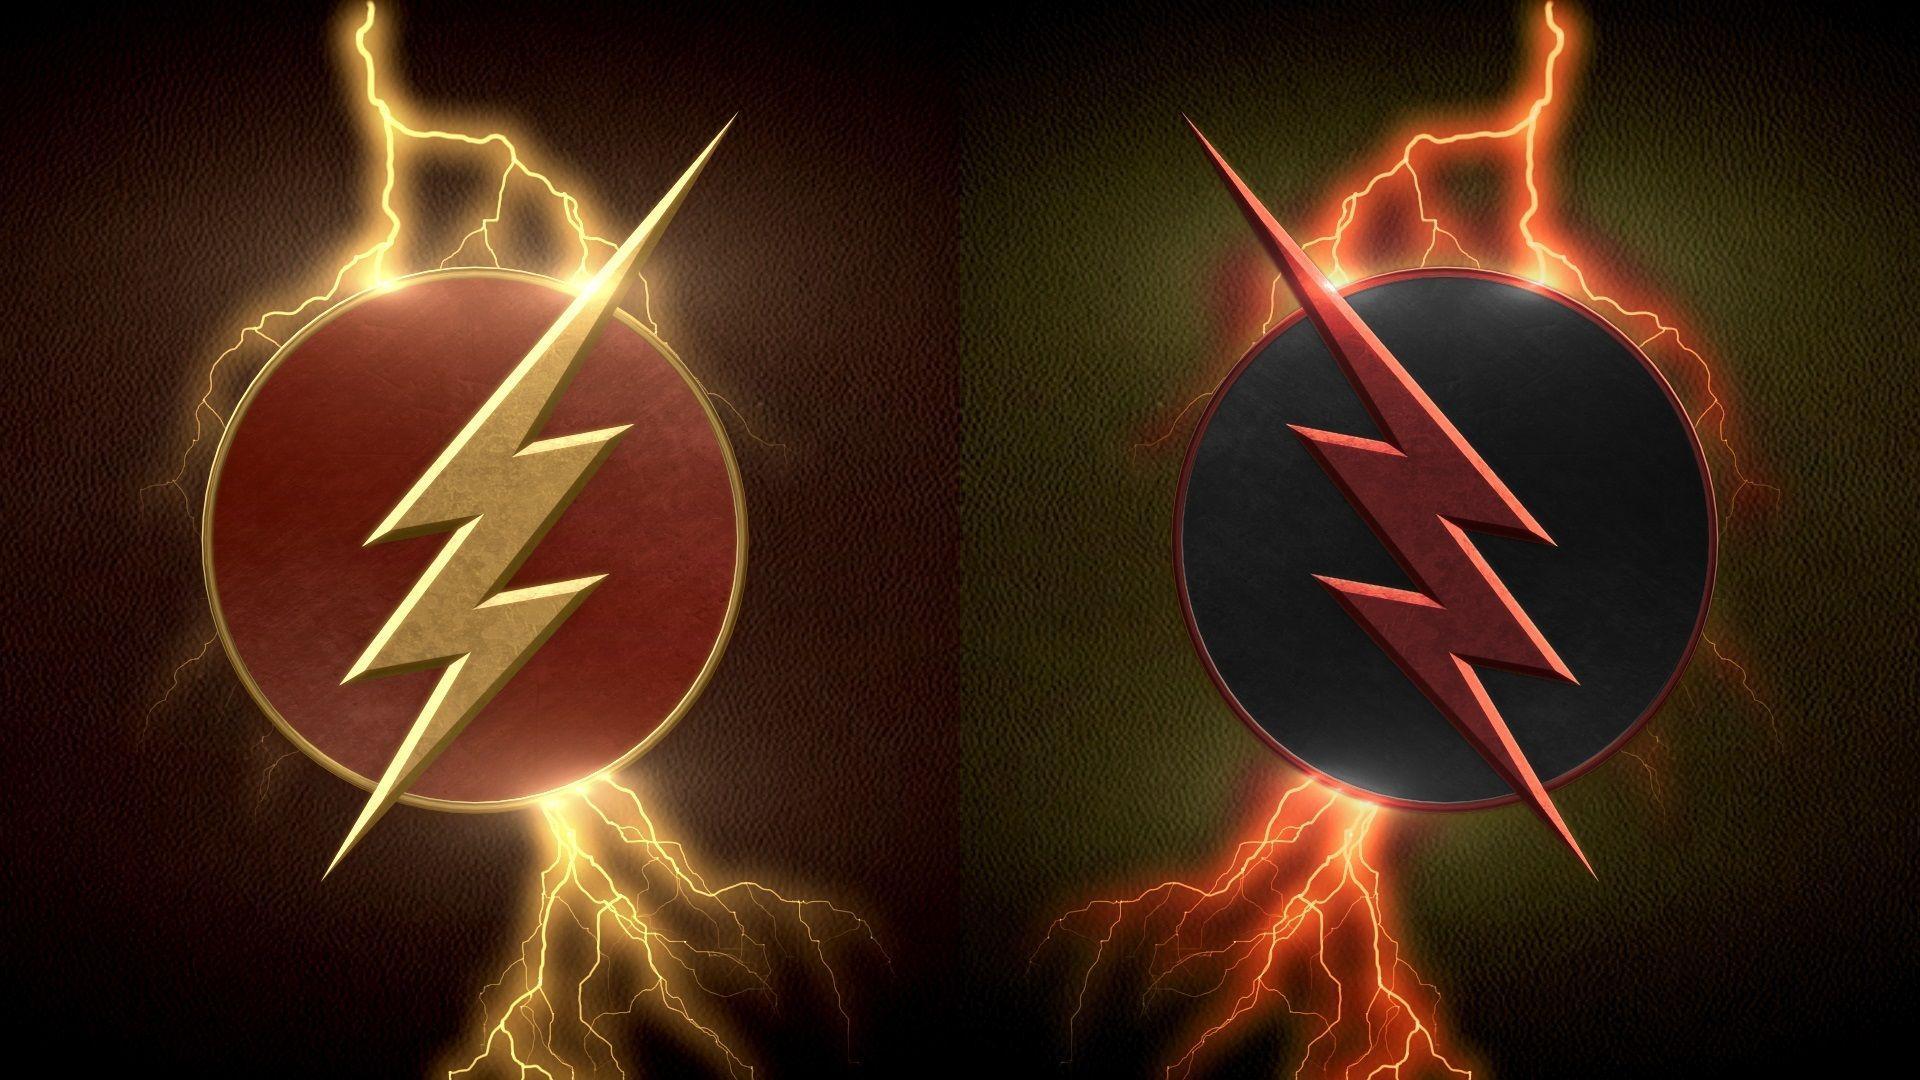 Here's a couple Flash wallpaper I made. 3840x1080 dual monitor